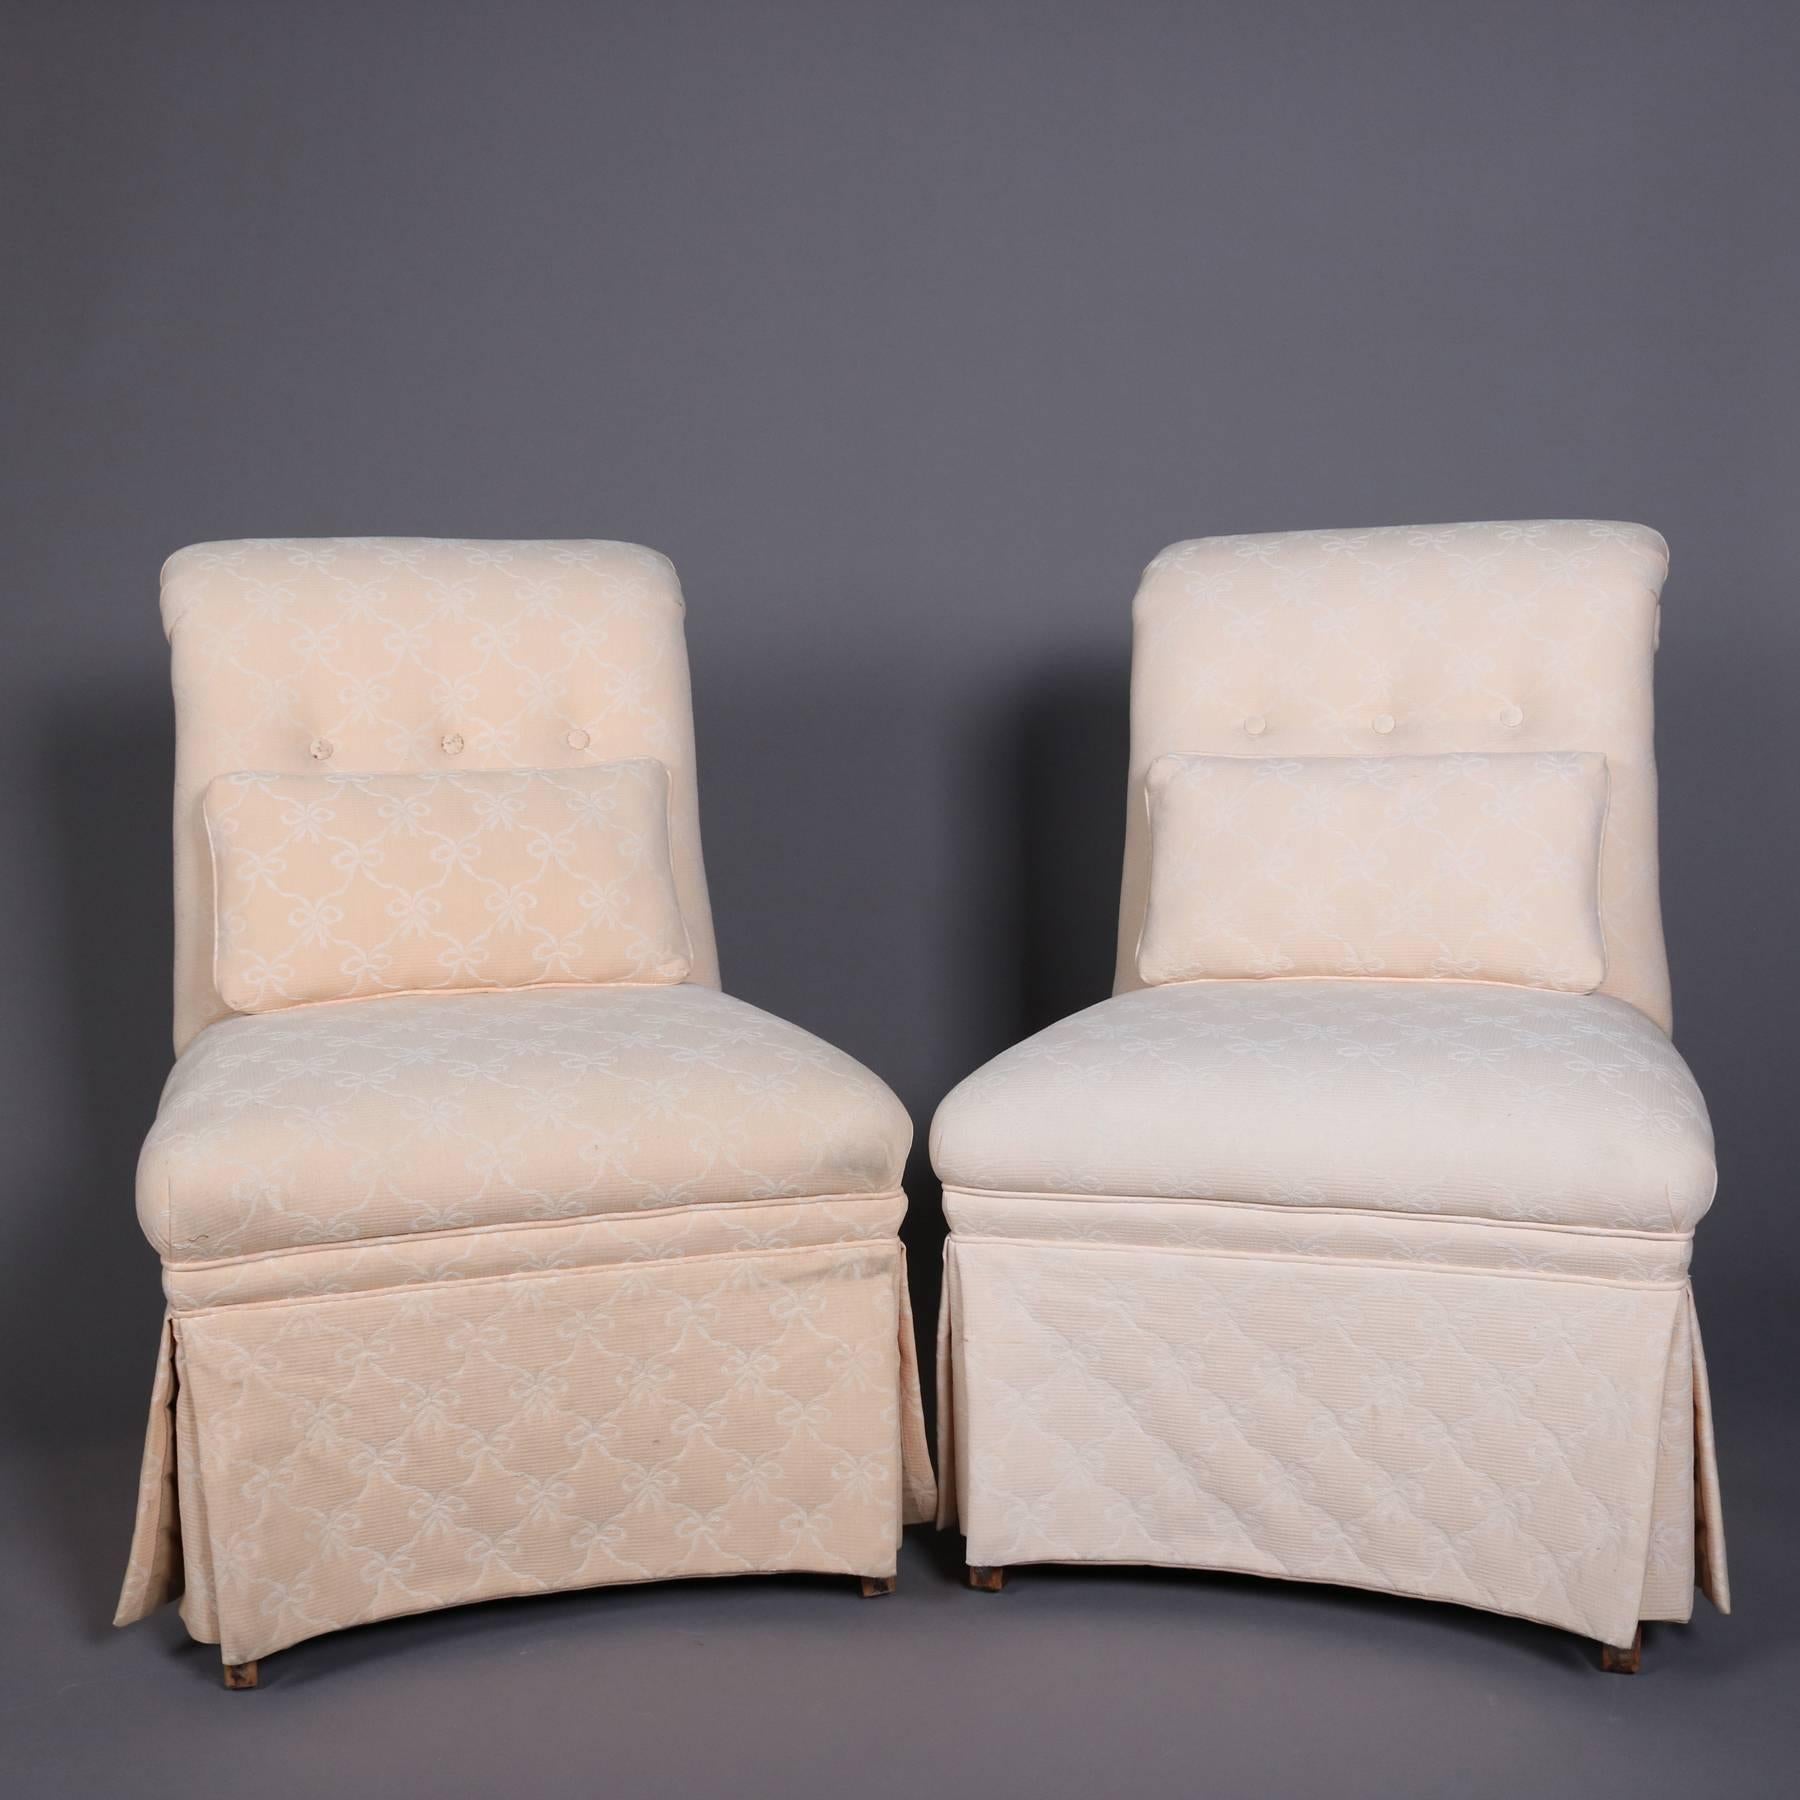 Pair of vintage upholstered petite slipper chairs feature scroll back form and upholstered upper and skirting, 20th century

***DELIVERY NOTICE – Due to COVID-19 we are employing NO-CONTACT PRACTICES in the transfer of purchased items. 